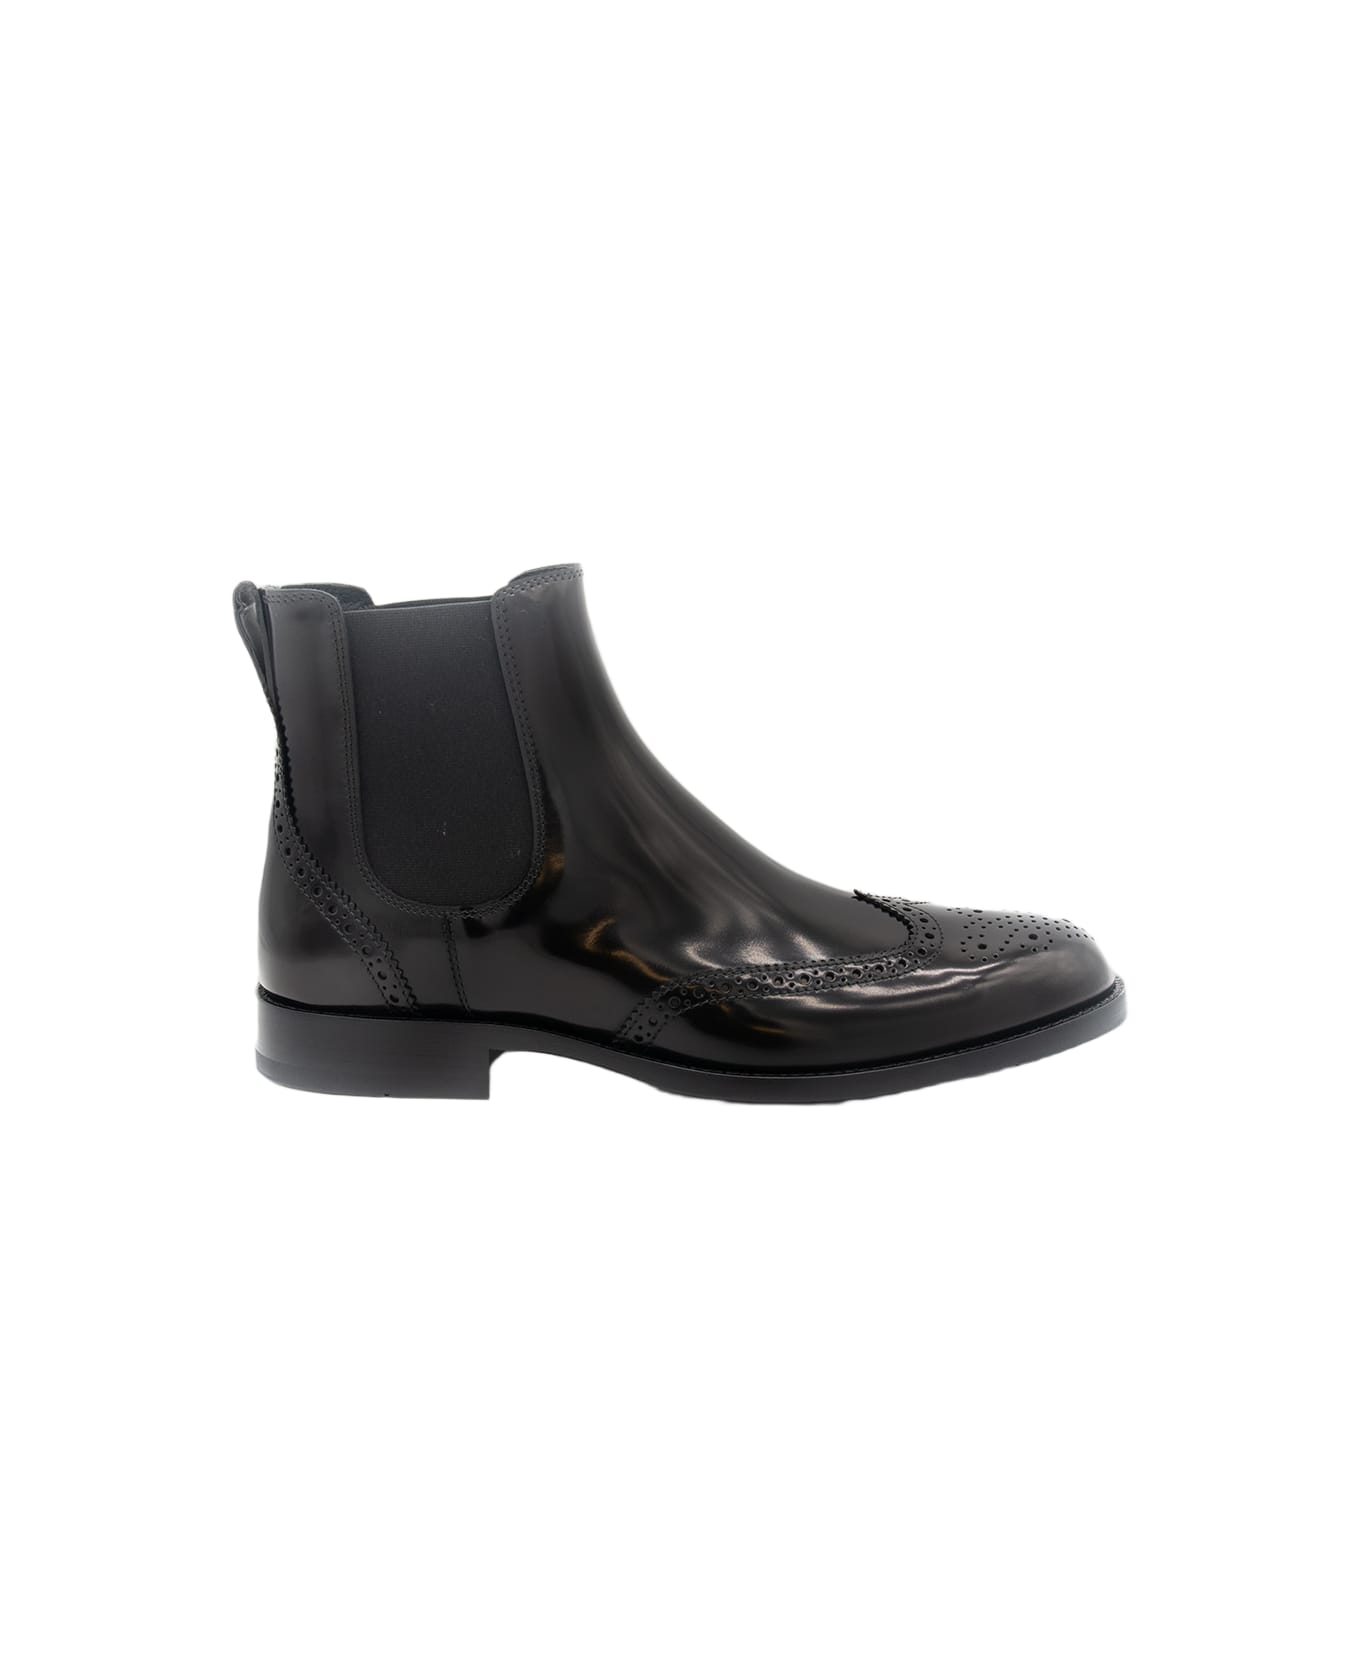 Tod's Black Leather Boots - Black ブーツ